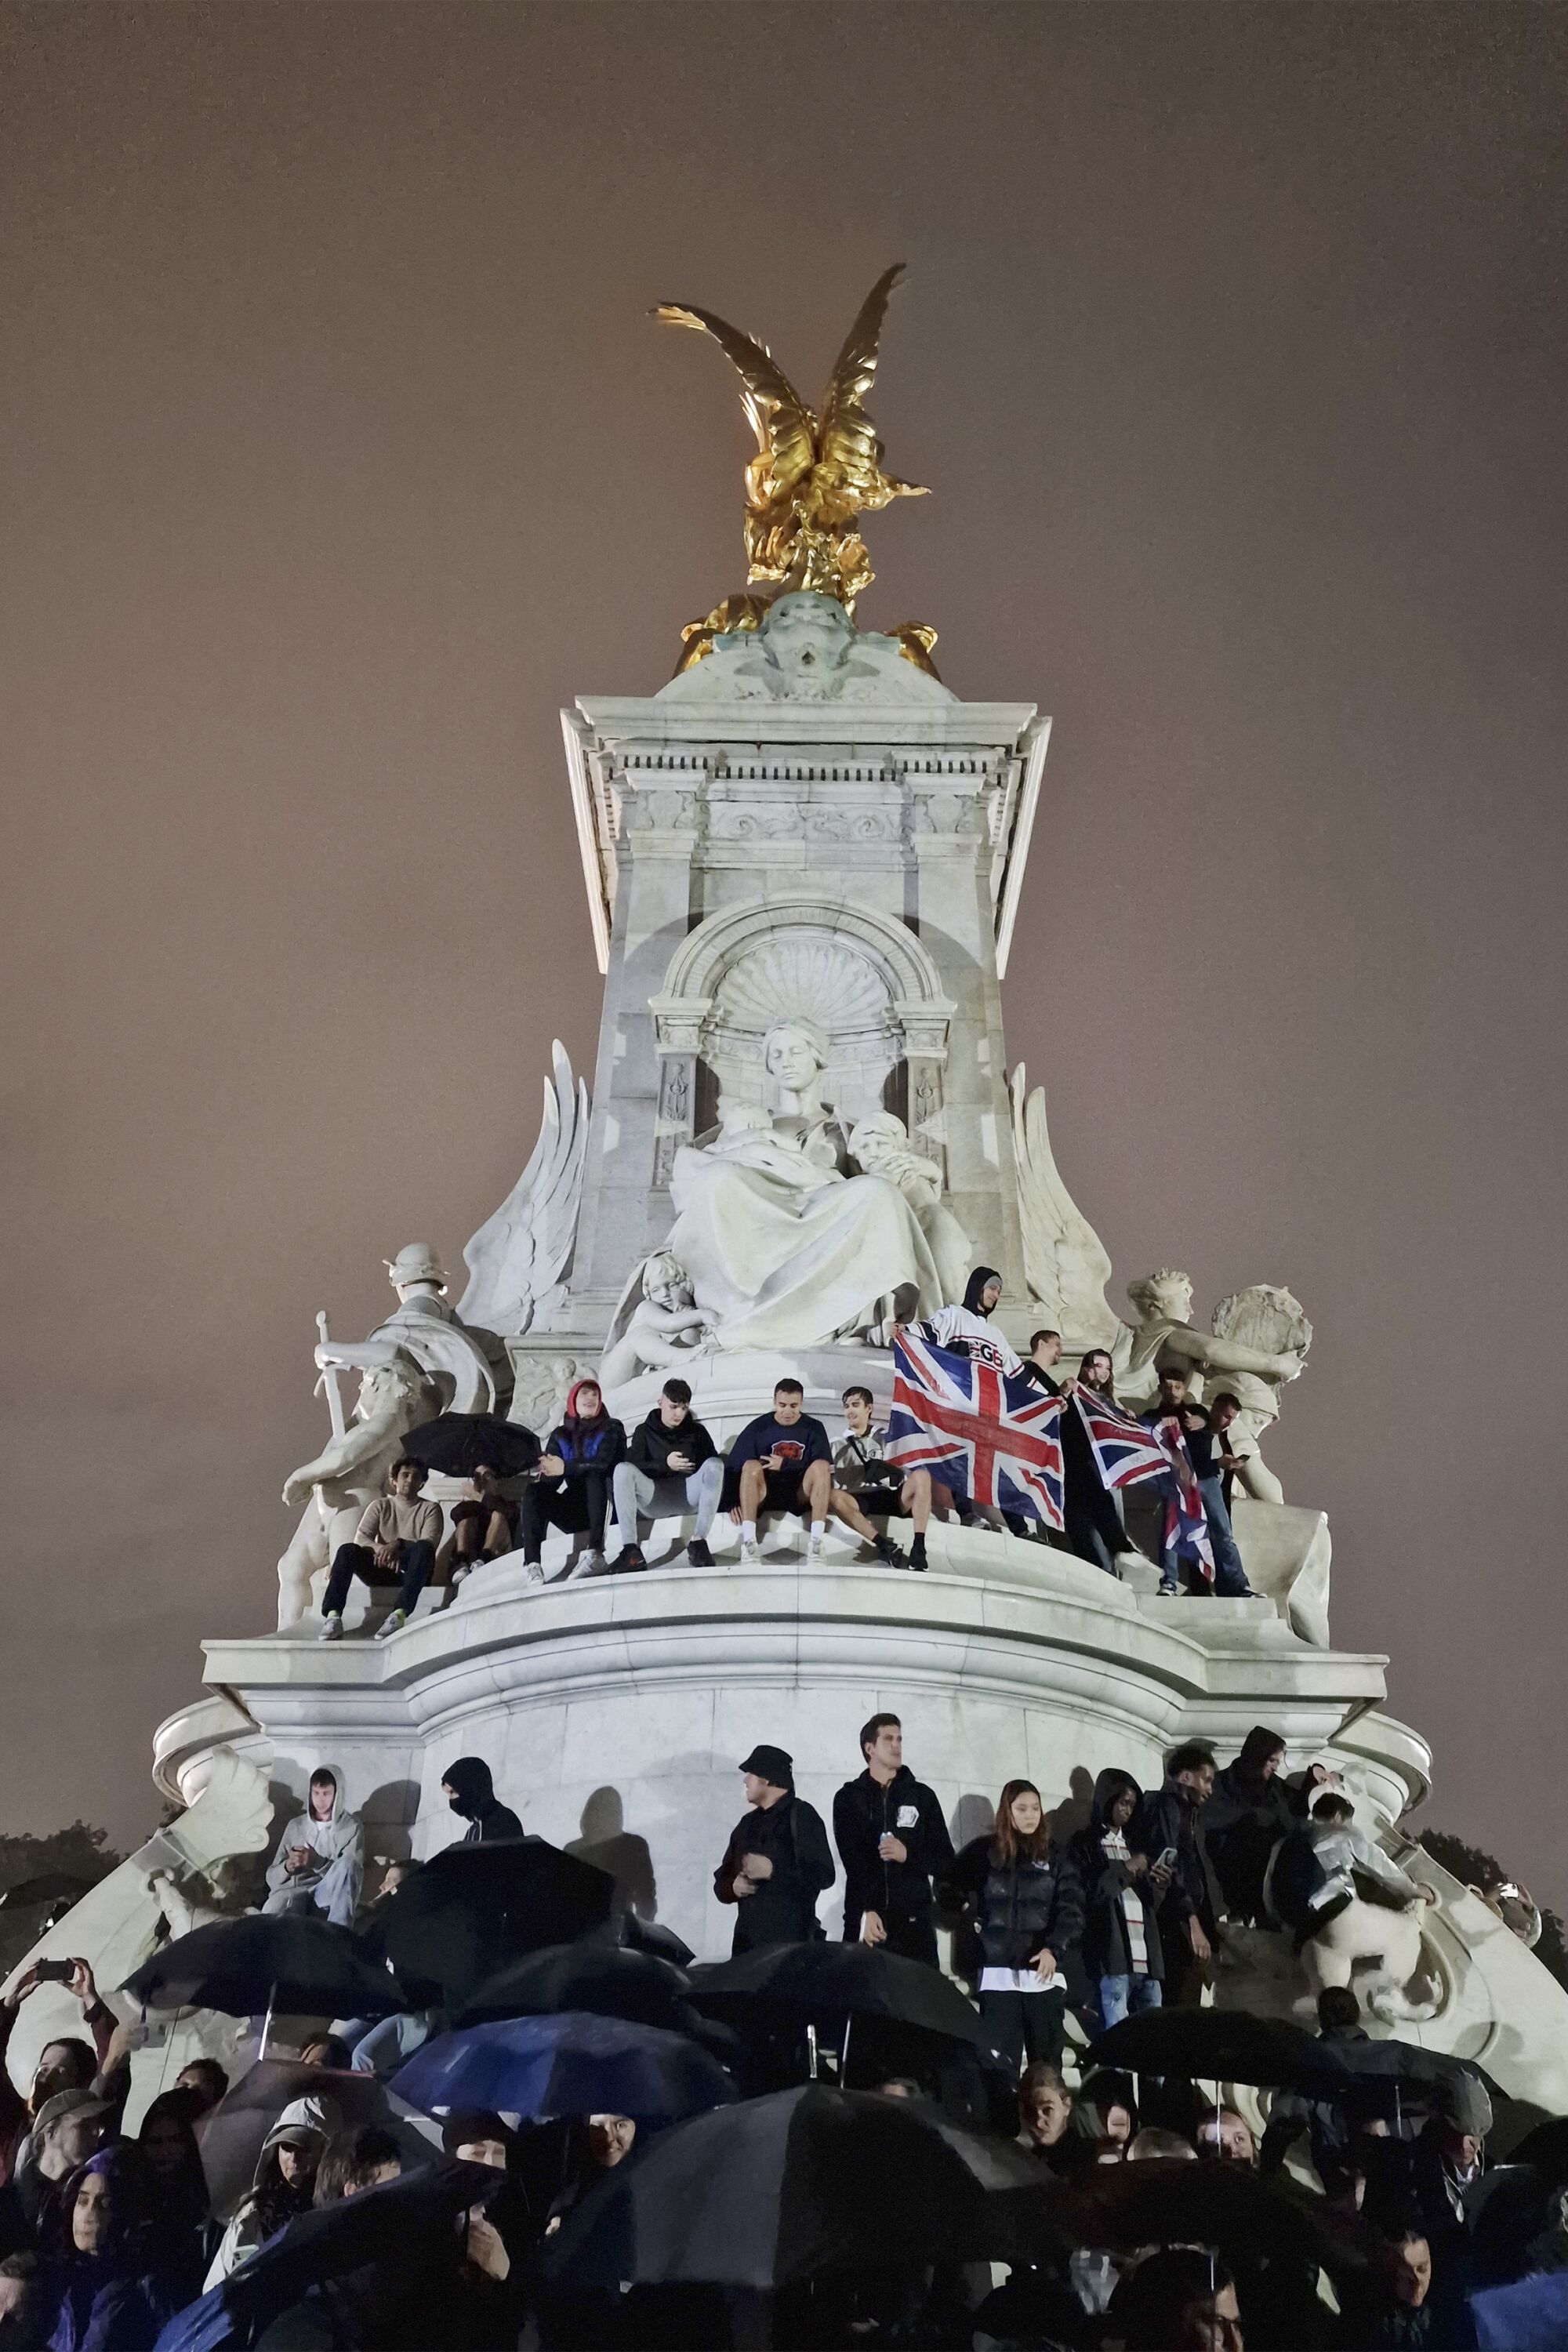 Crowds gather on the Queen Victoria Memorial in front of Buckingham Palace following the death today of Queen Elizabeth II